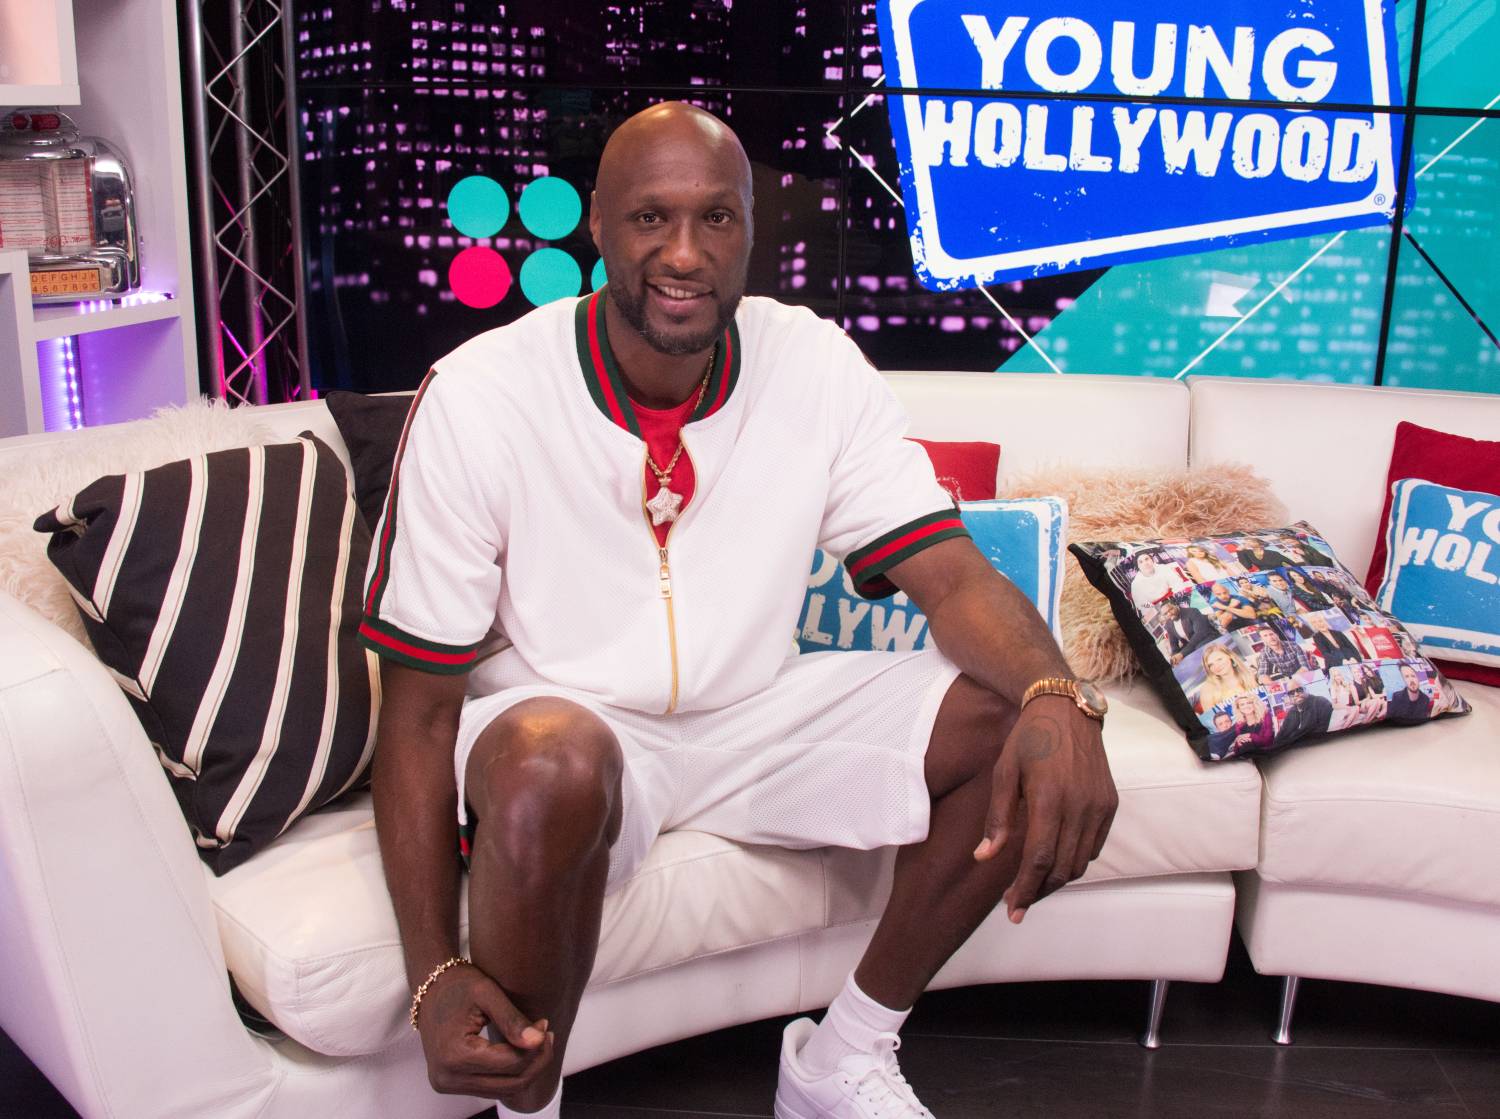 Lamar Odom visits the Young Hollywood Studio on September 11, 2019 in Los Angeles, California.